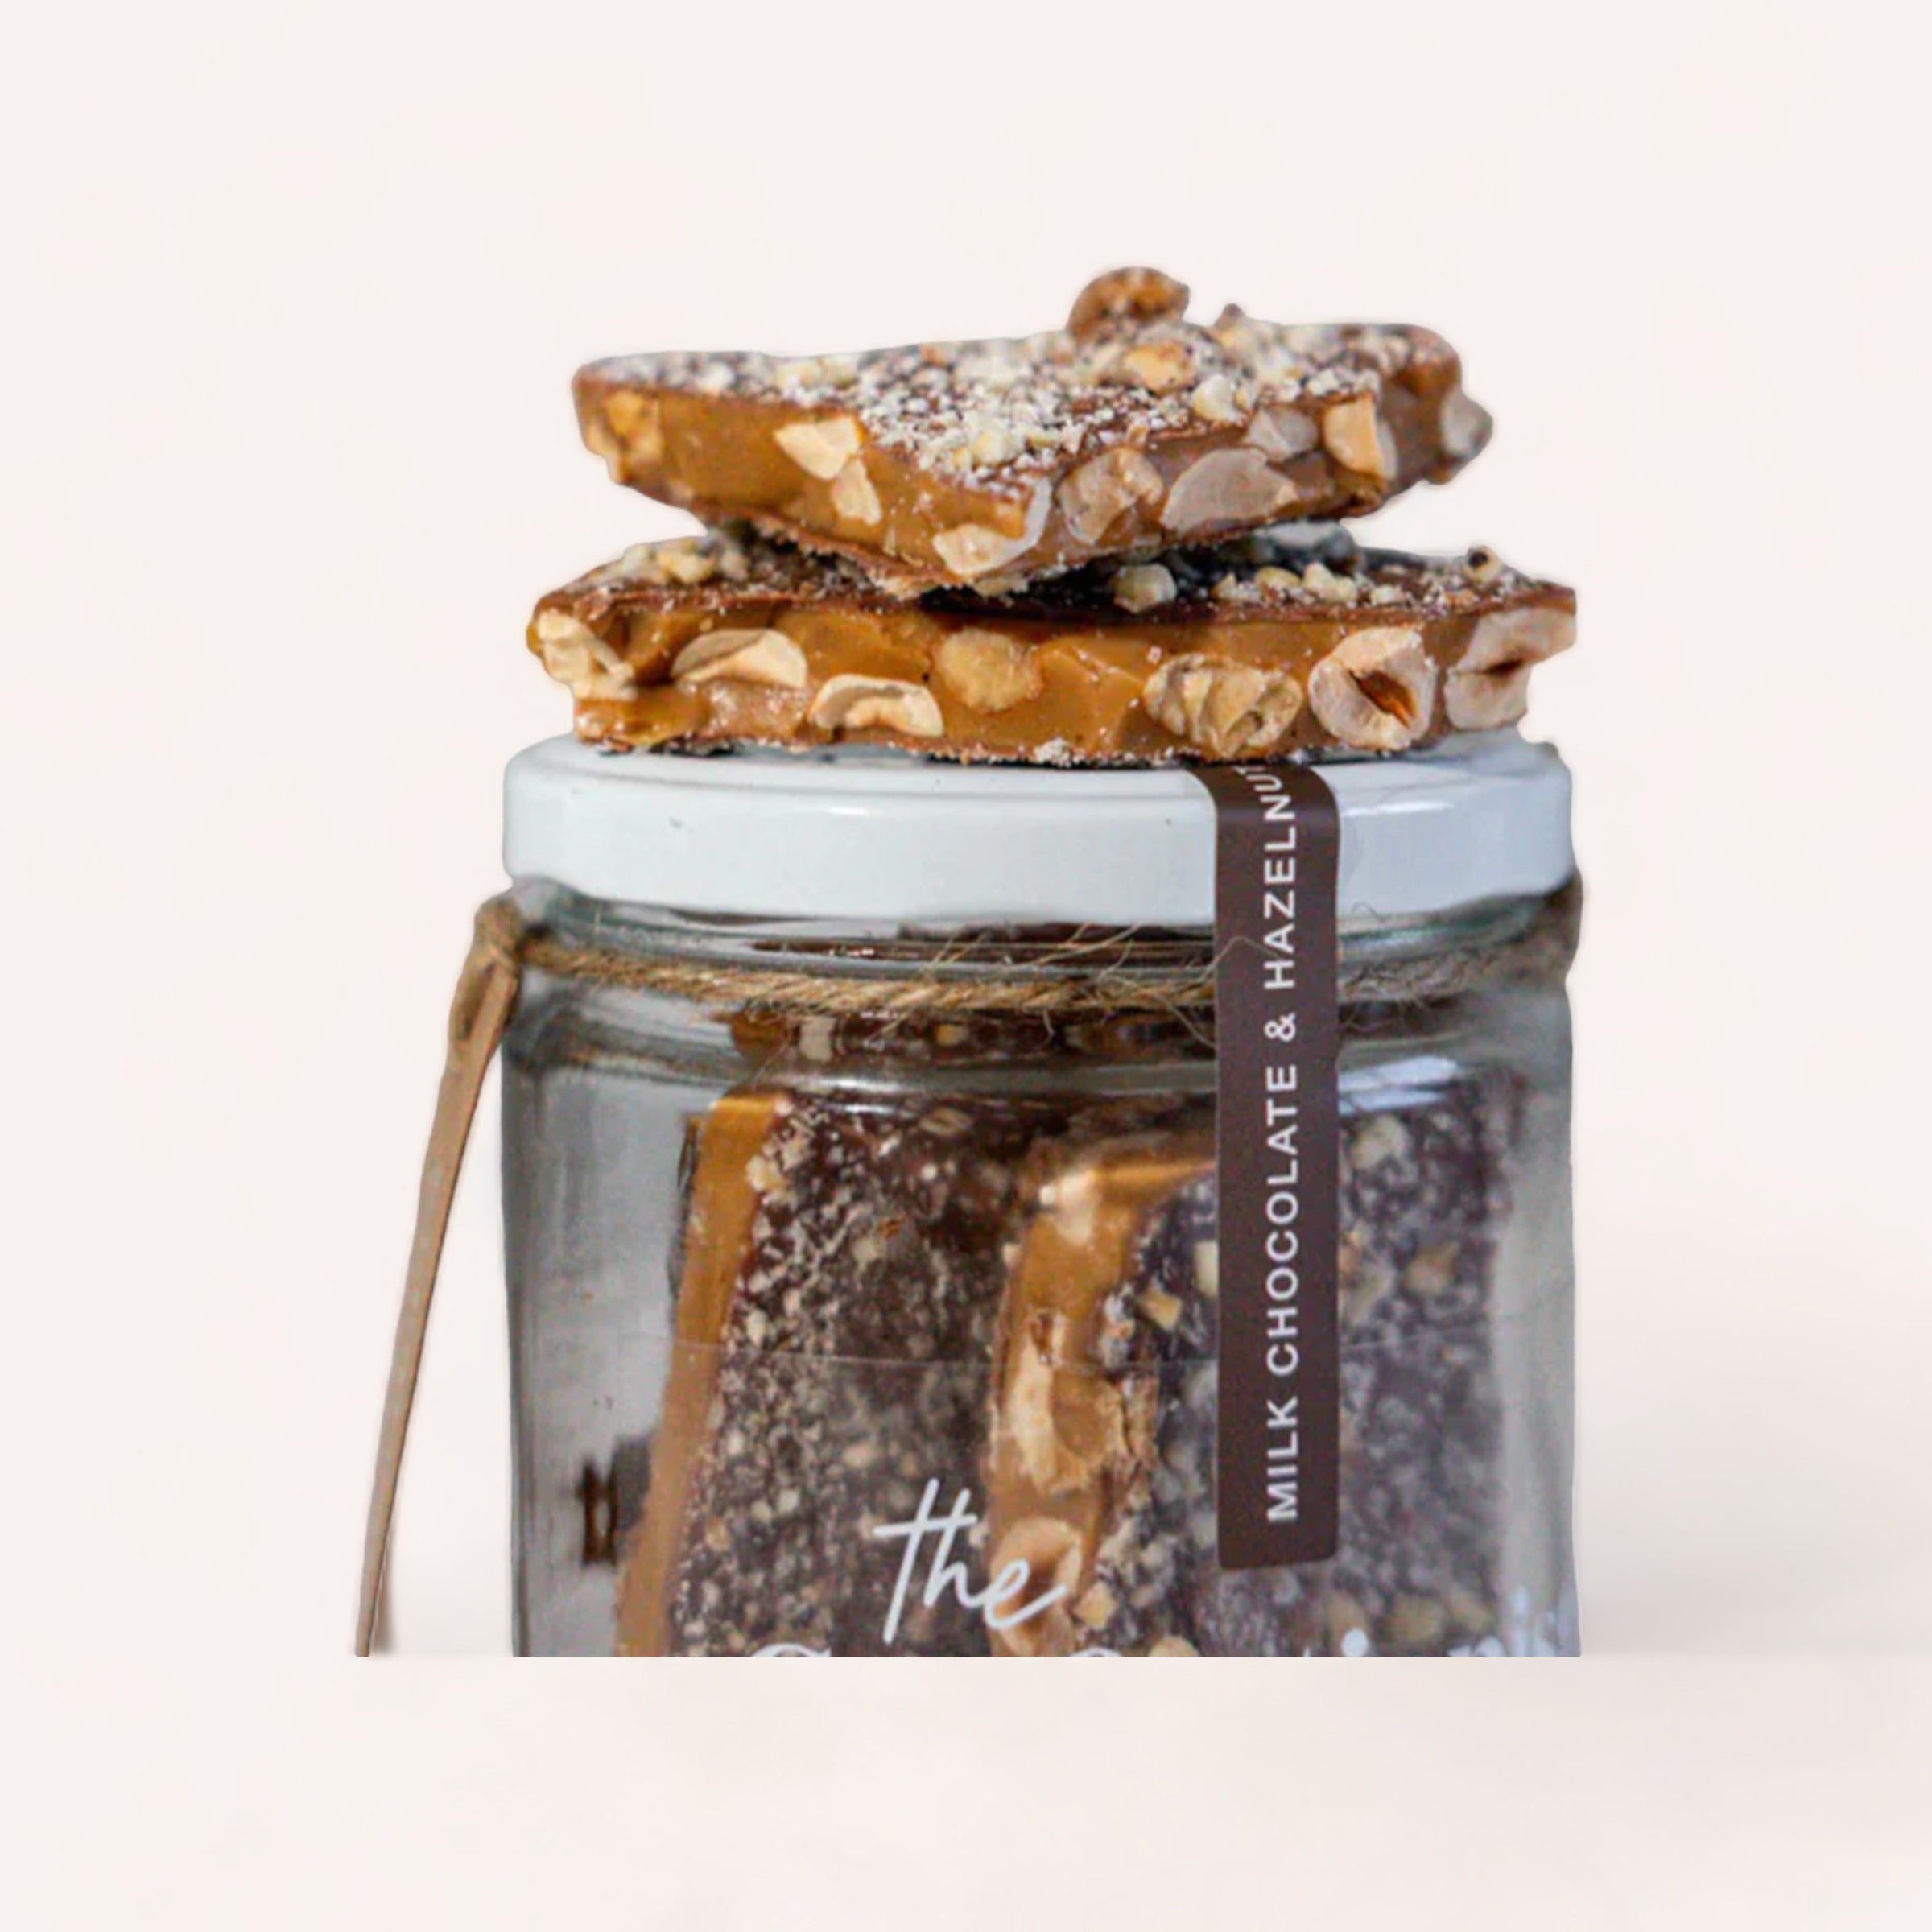 Milk Chocolate & Hazelnut Toffee by The Confectionist